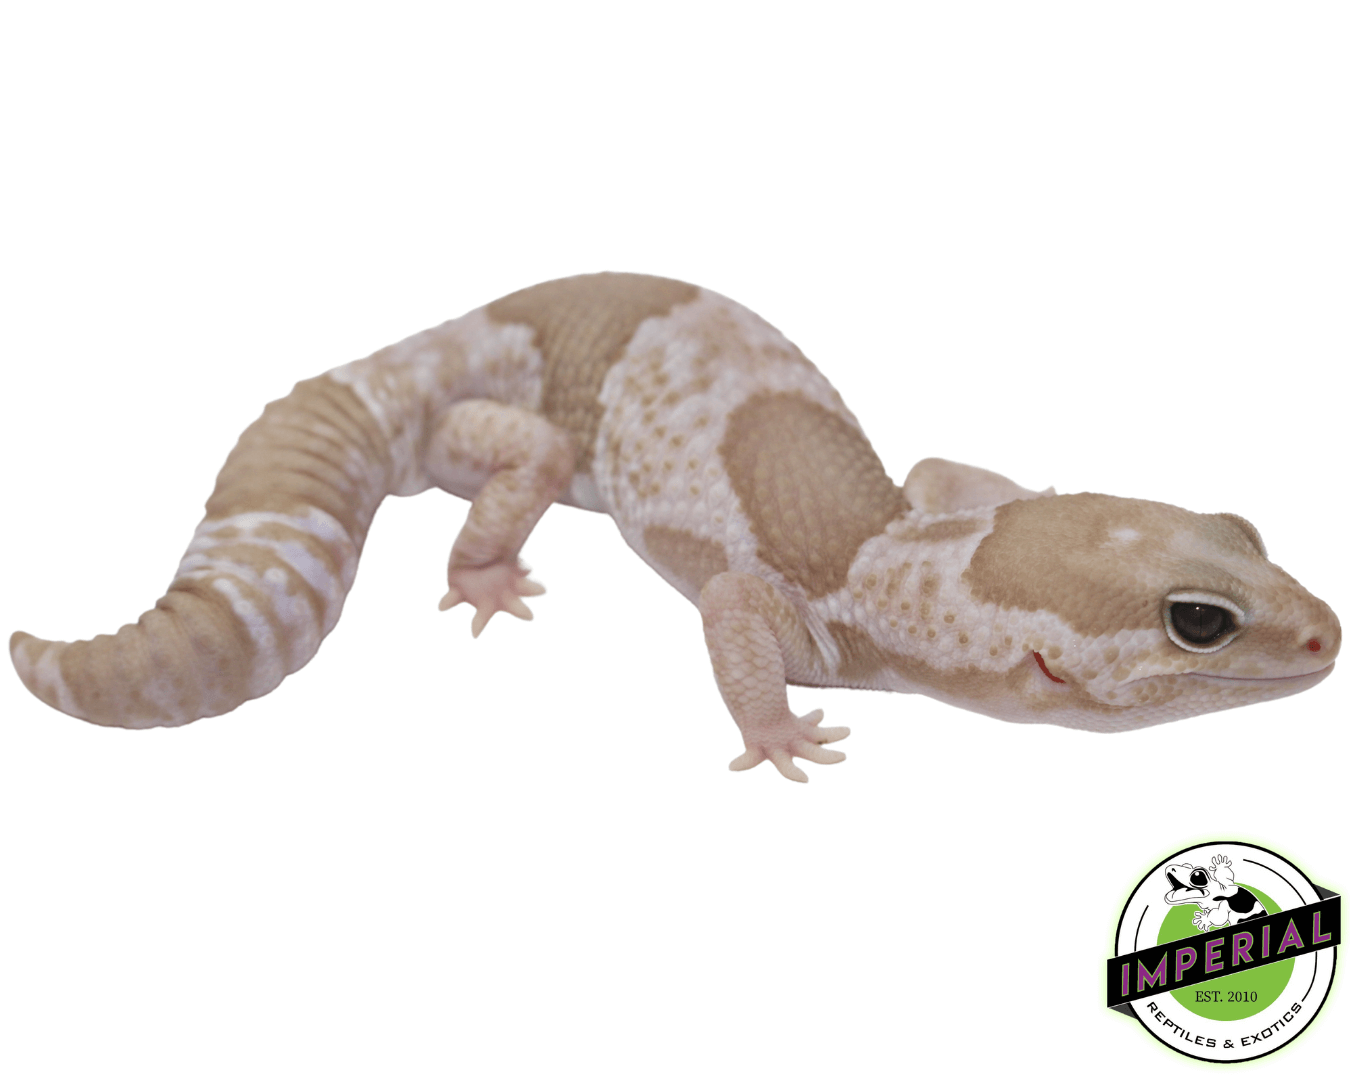 Snow African Fat Tail gecko for sale, buy reptiles online